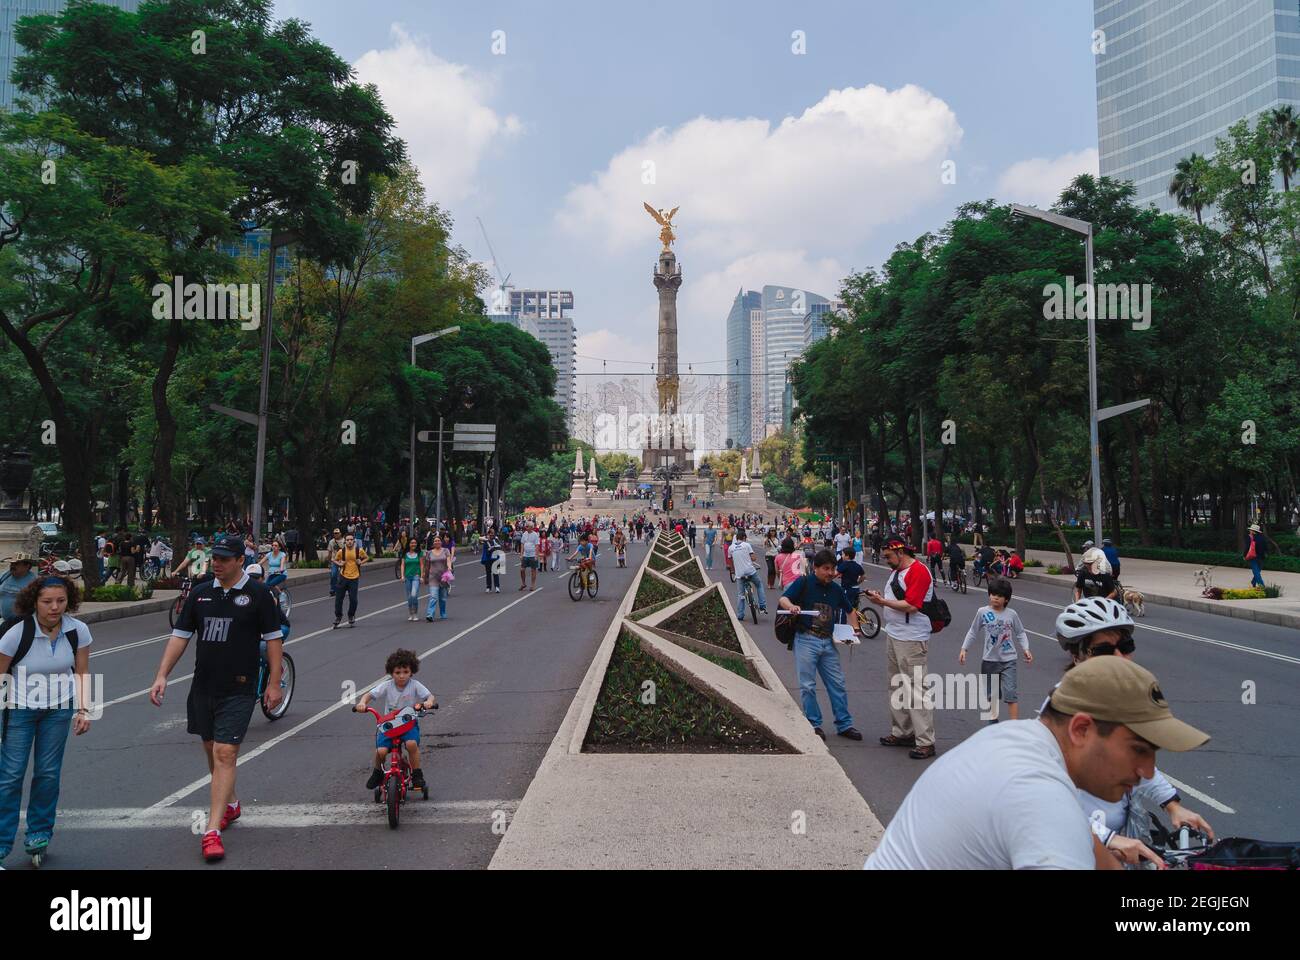 Mexico, Mexico City, August 26, 2012, People go out like every Sunday with their bicycle to walk through one of the most iconic avenues of Mexico City Stock Photo